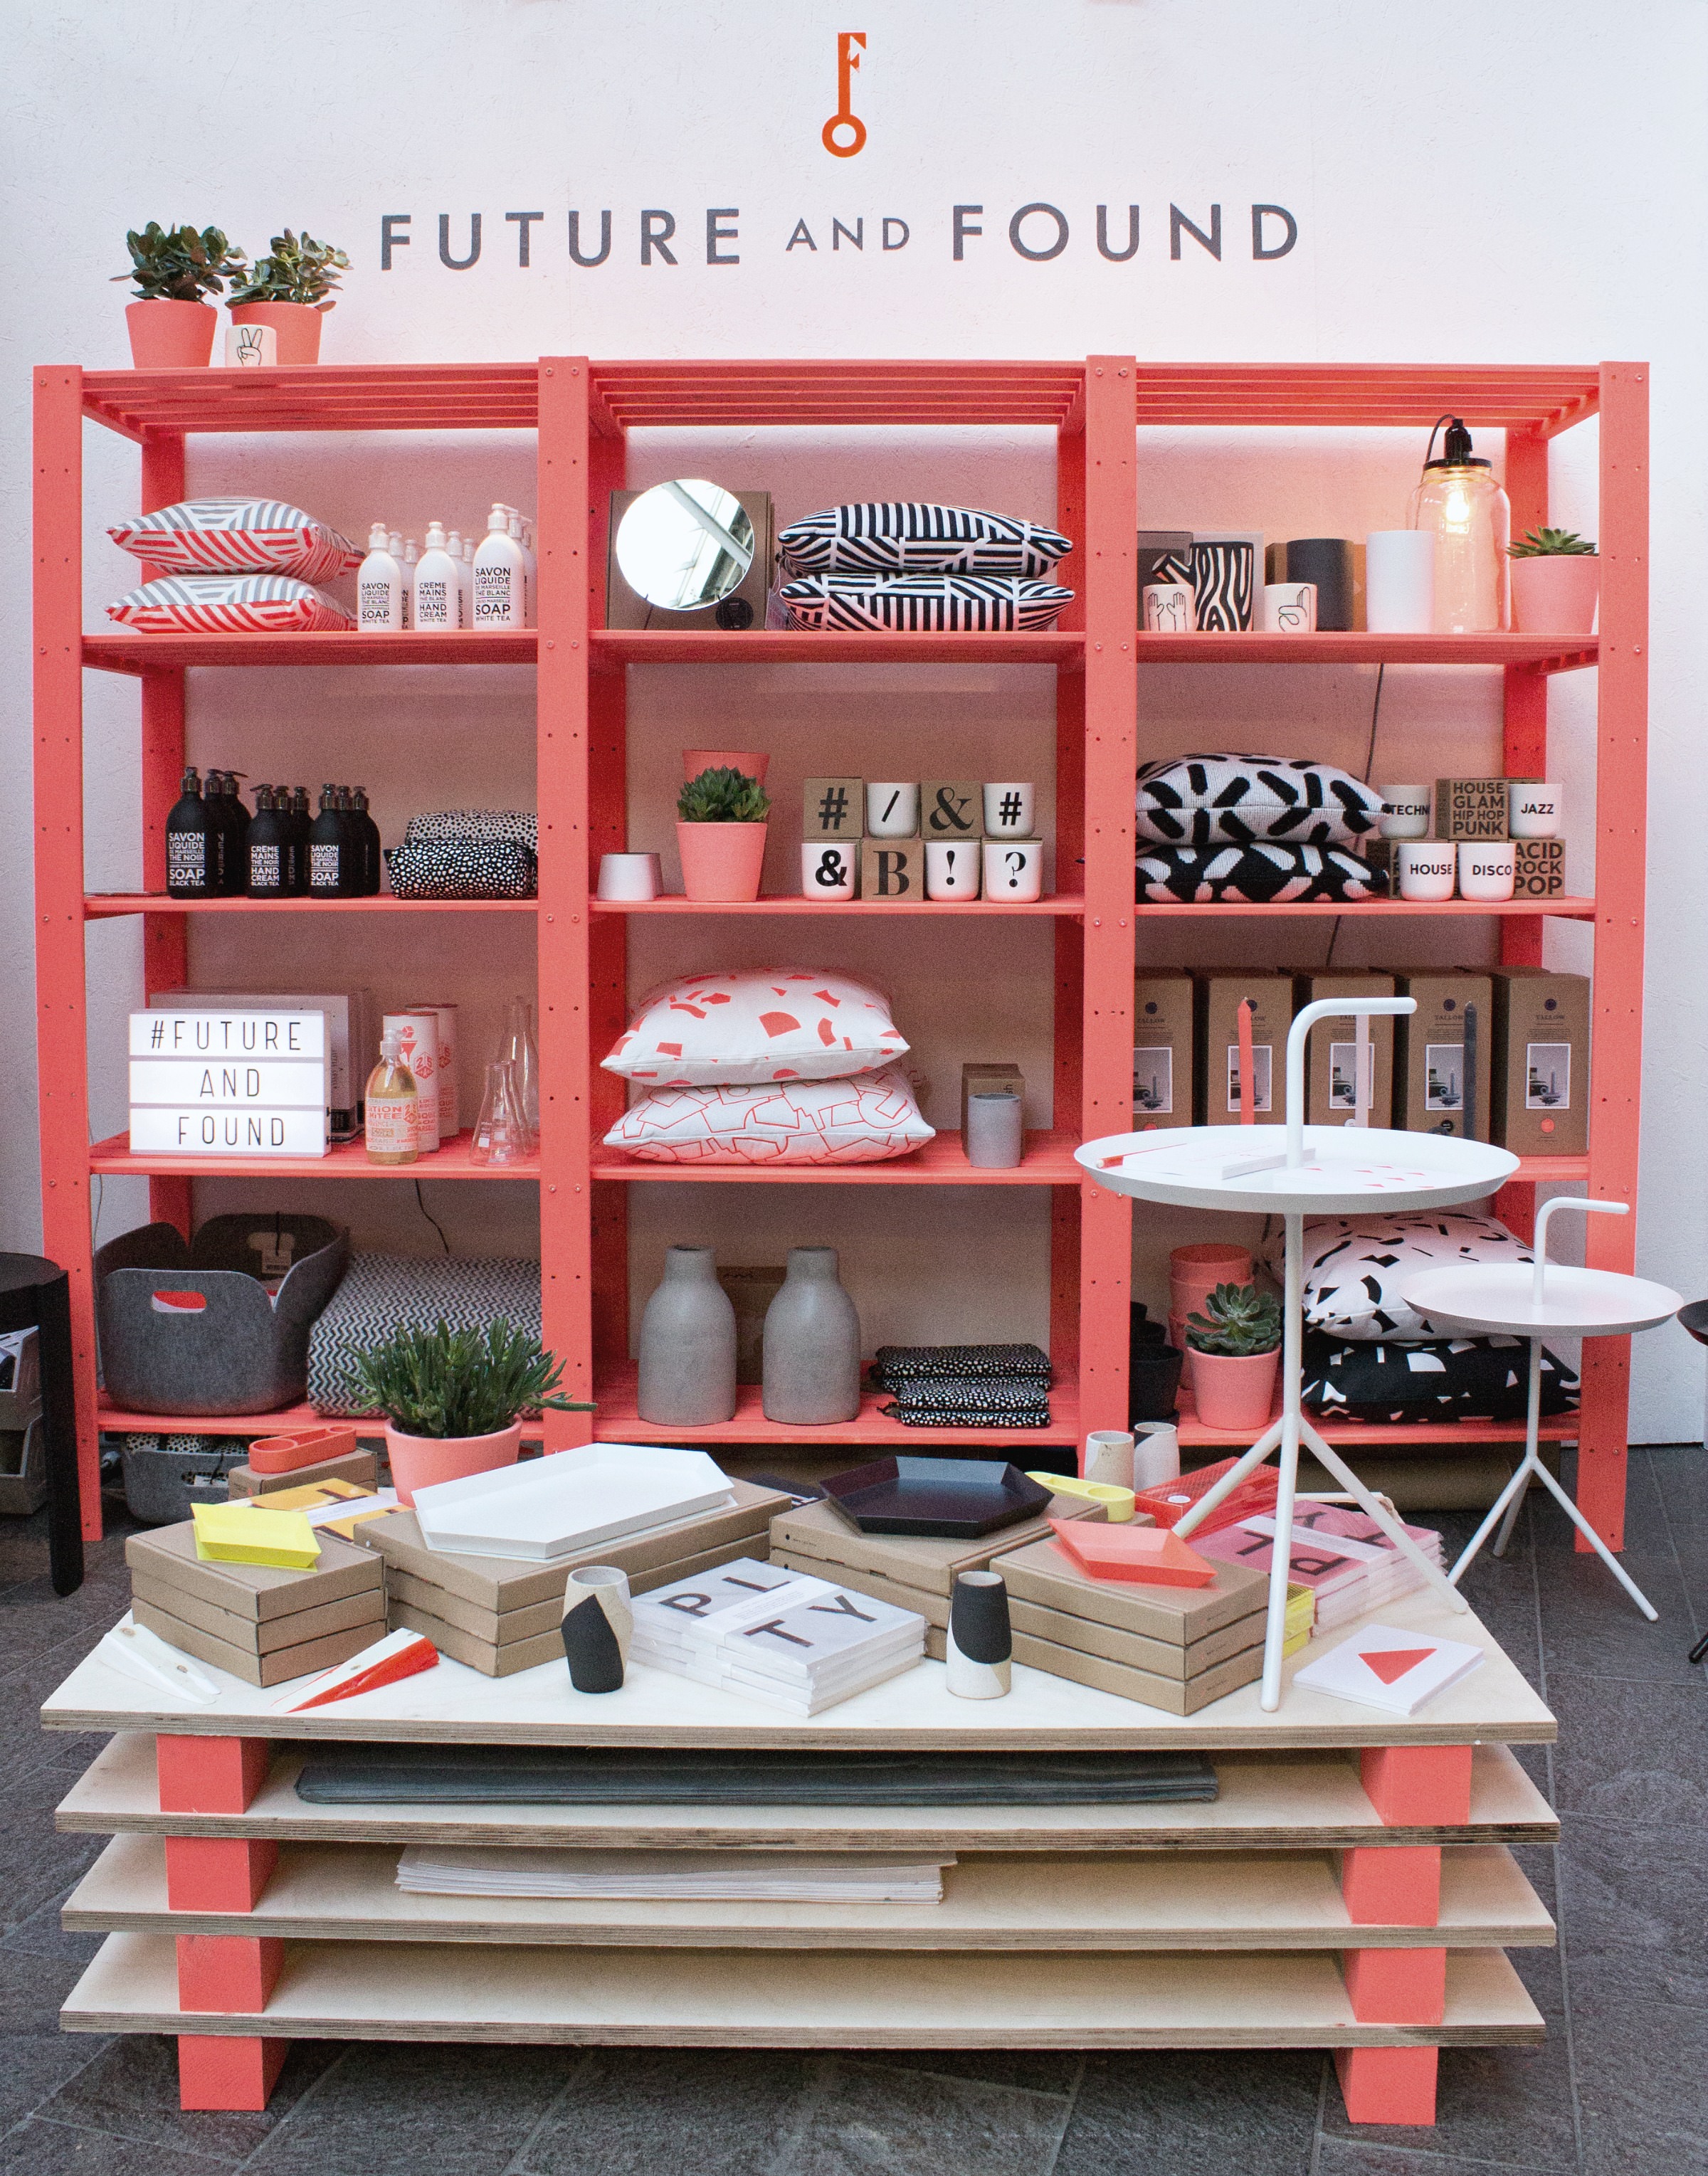 future-and-found-at-designjunction-little-big-bell